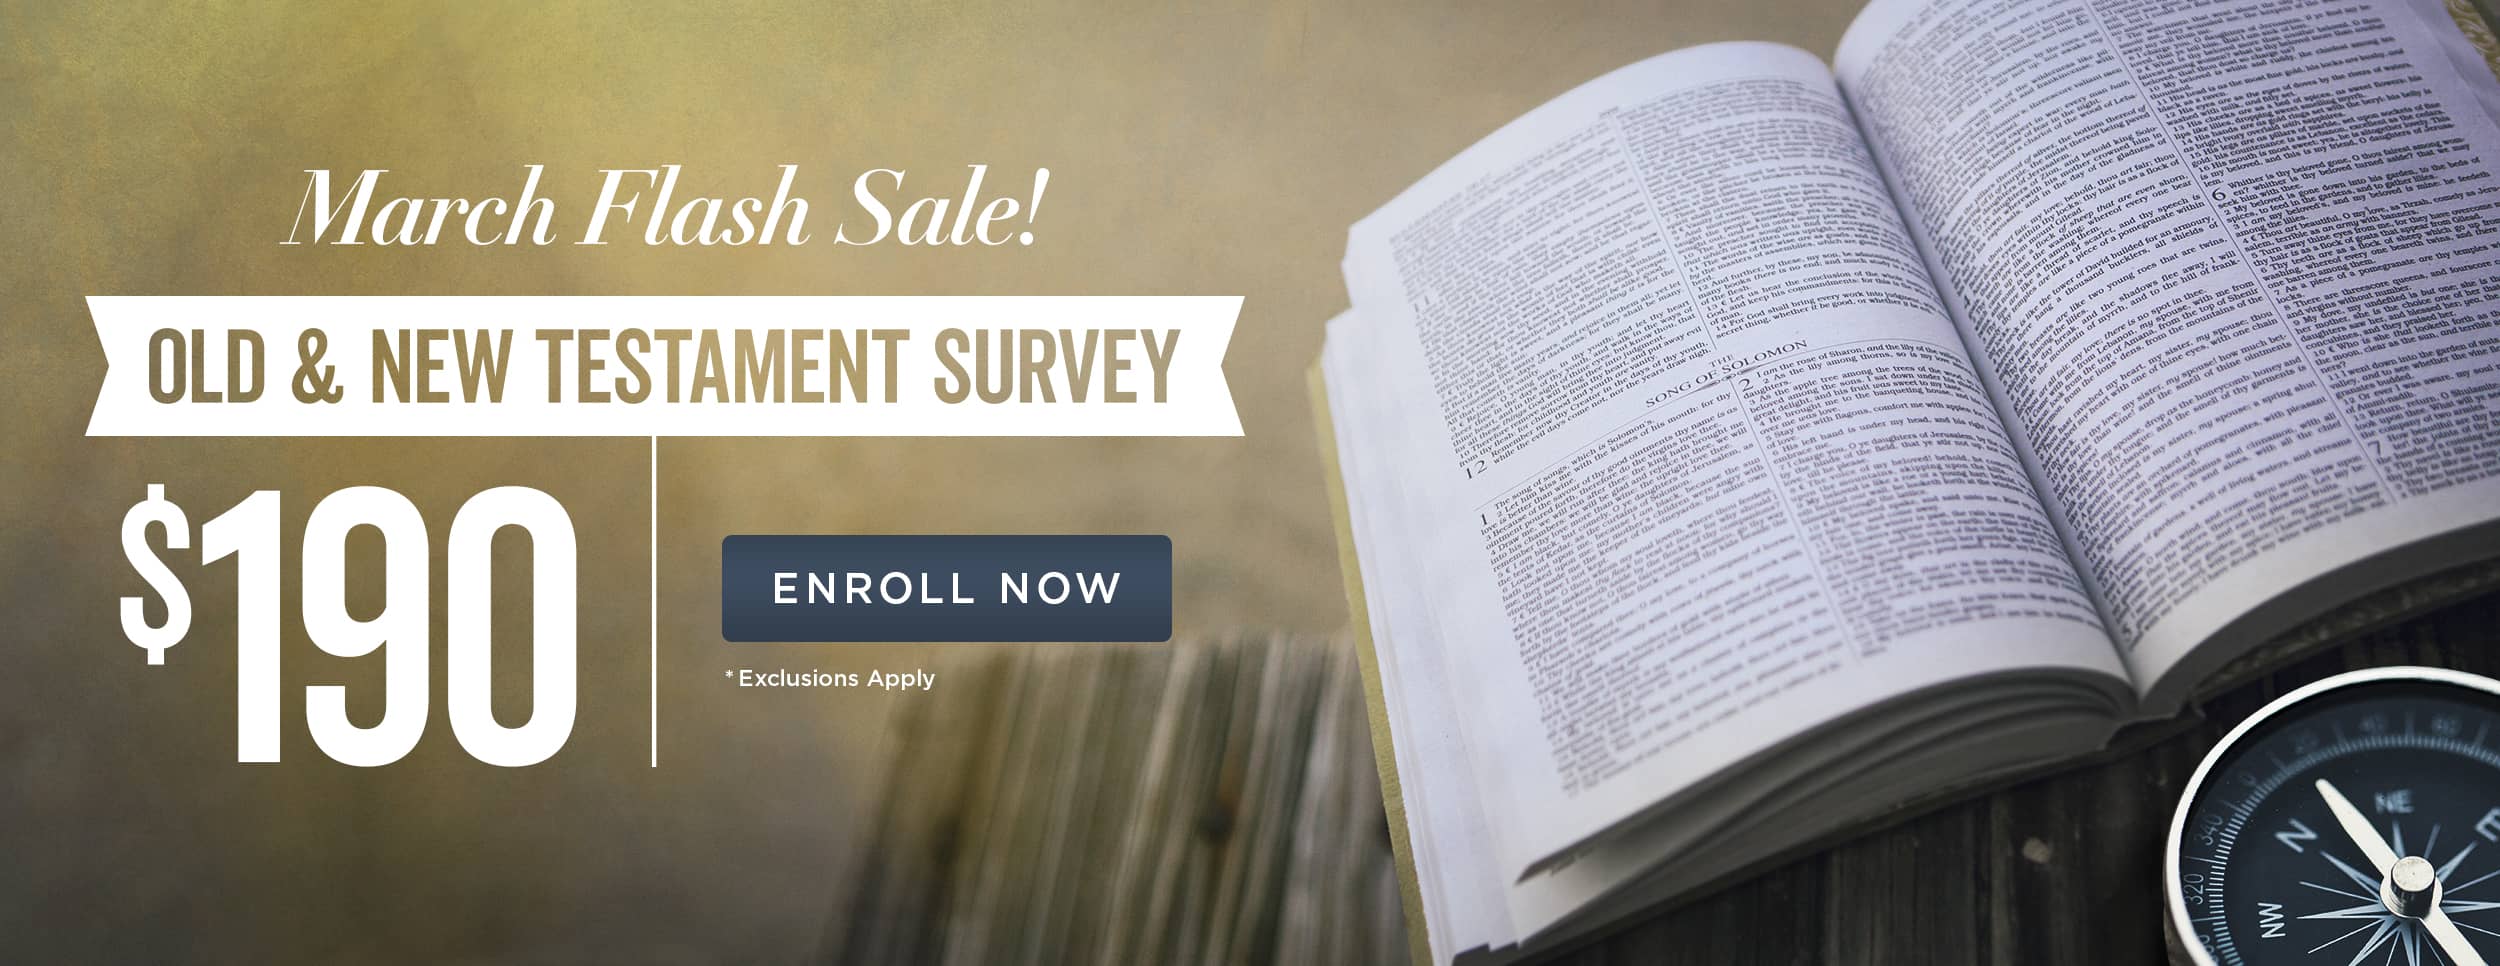 Old and New Testament March Flash Sale – Website Banner